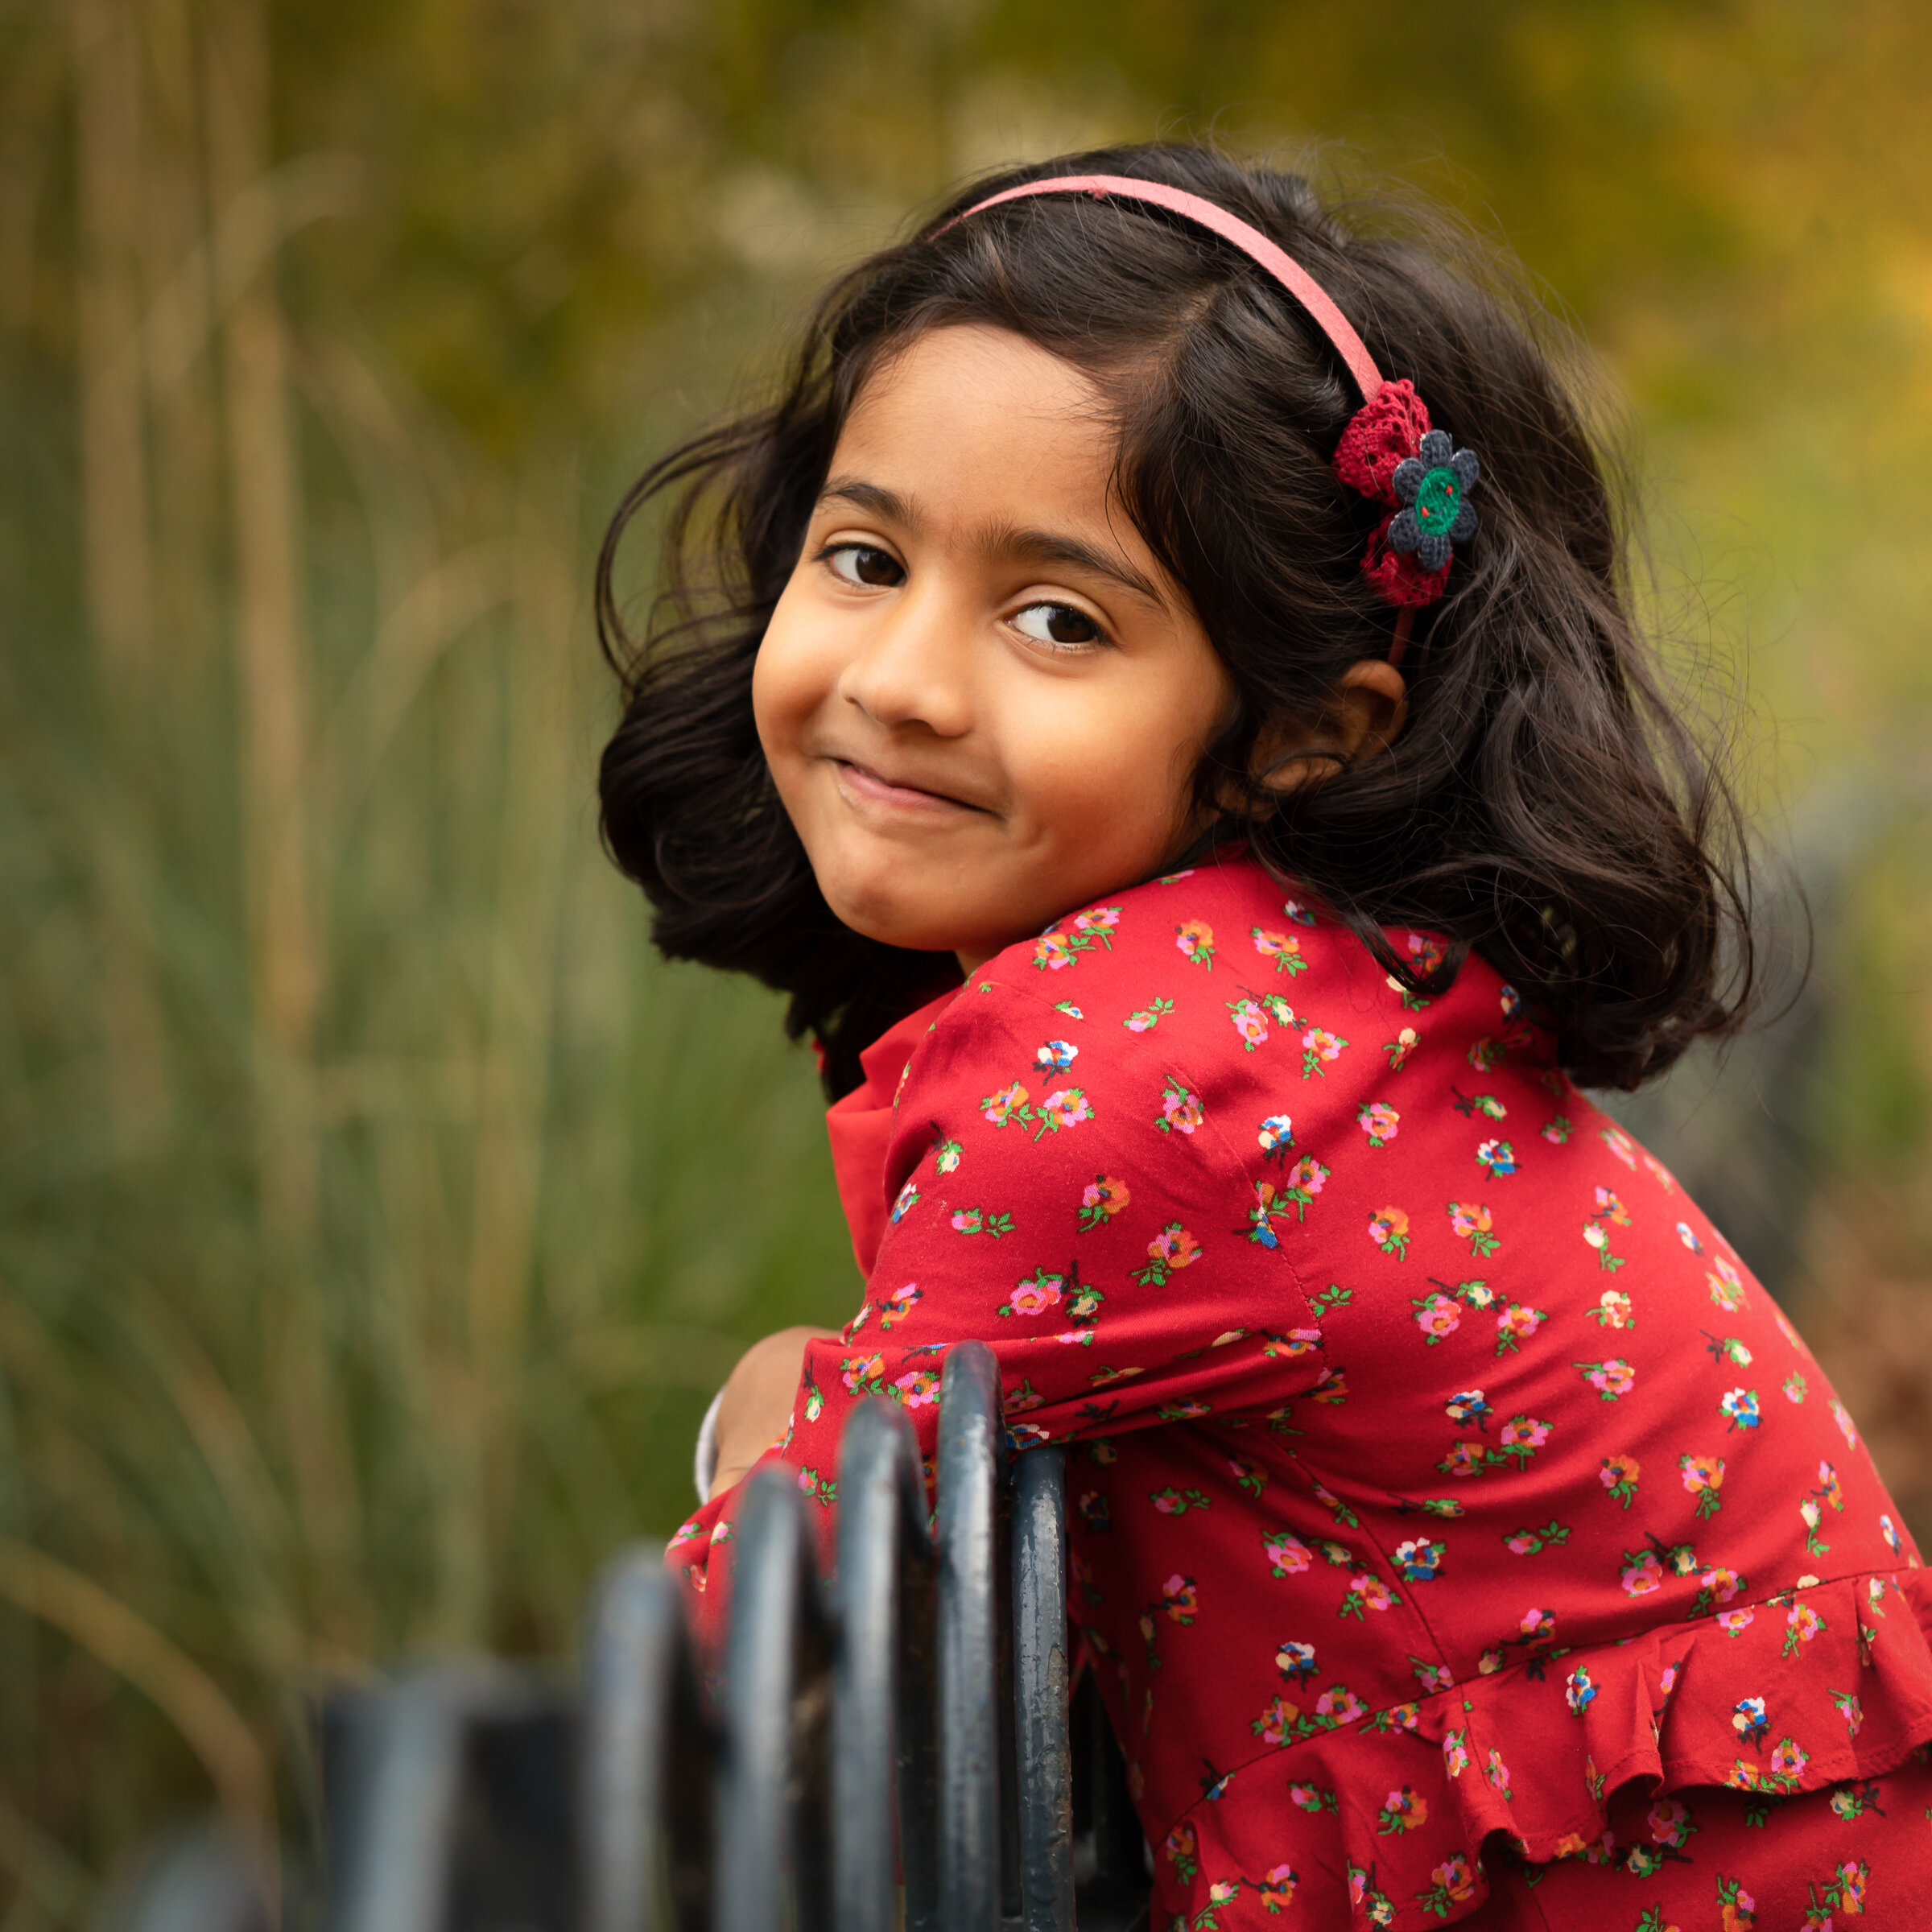 smiling girl leaning on fence